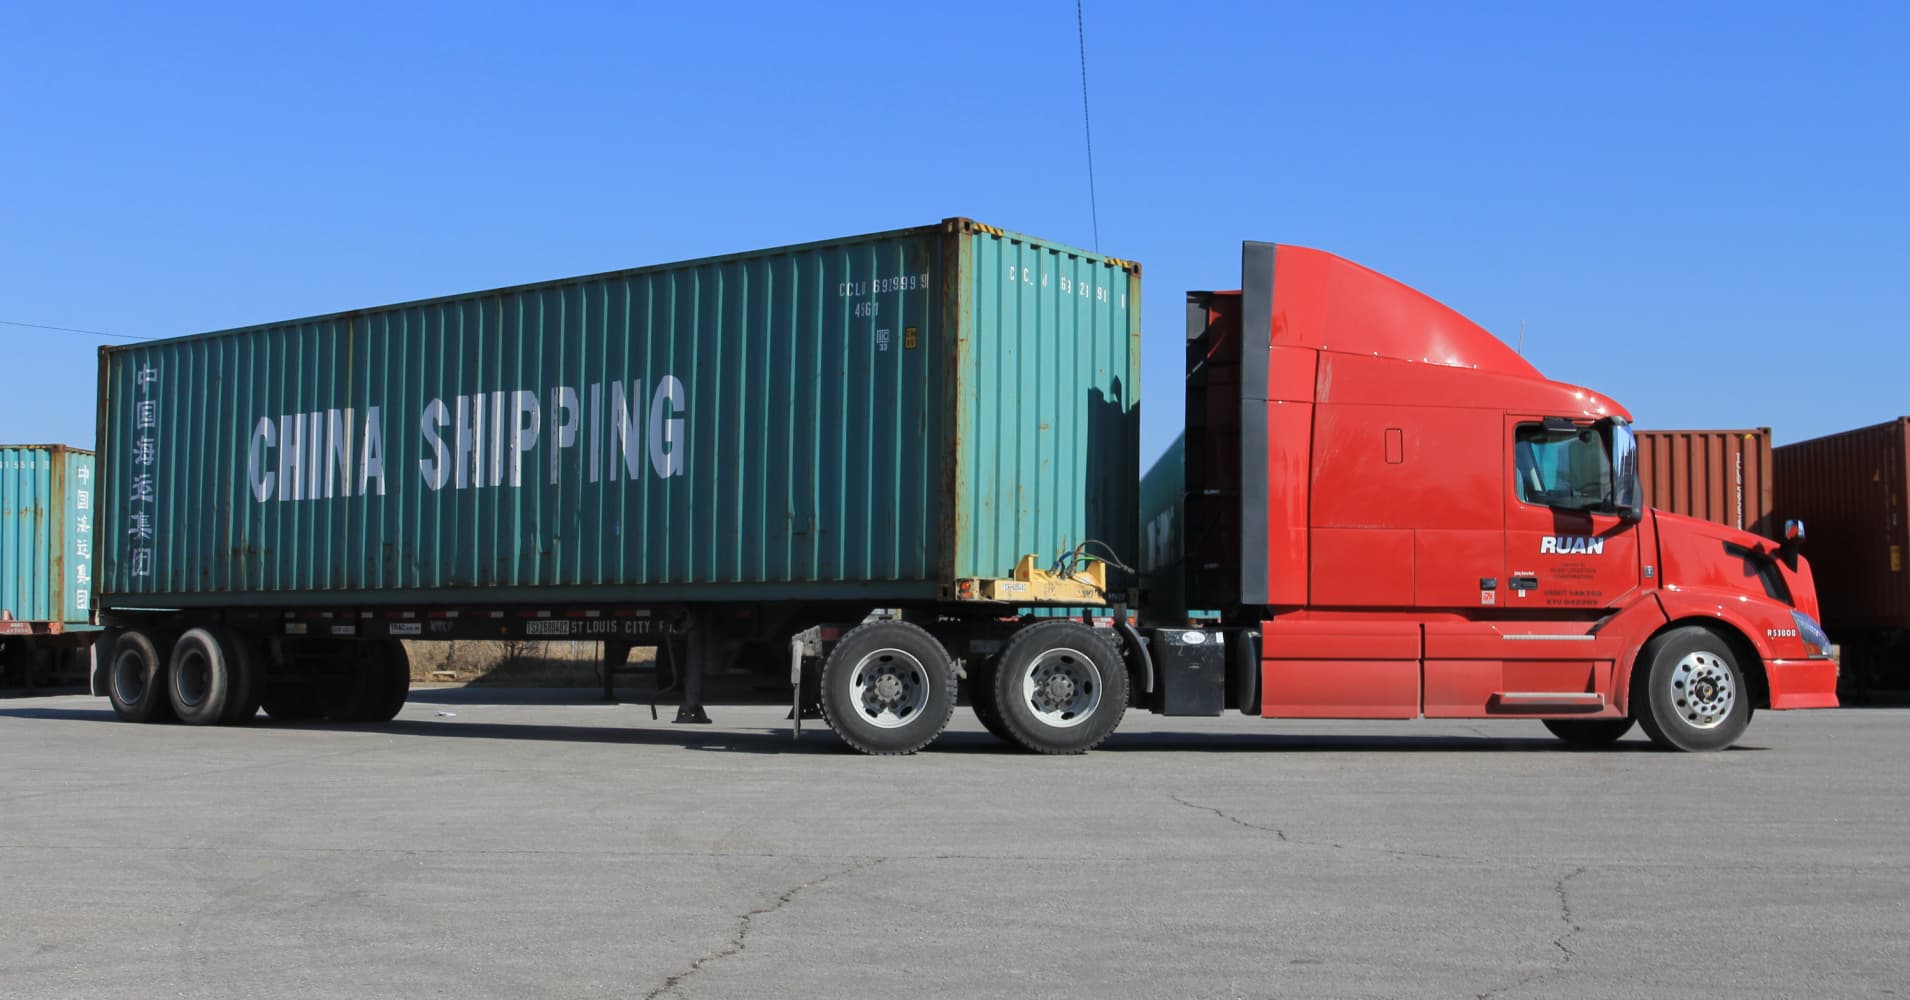 Investing in transports: Intermodal part of freight business is flourishing